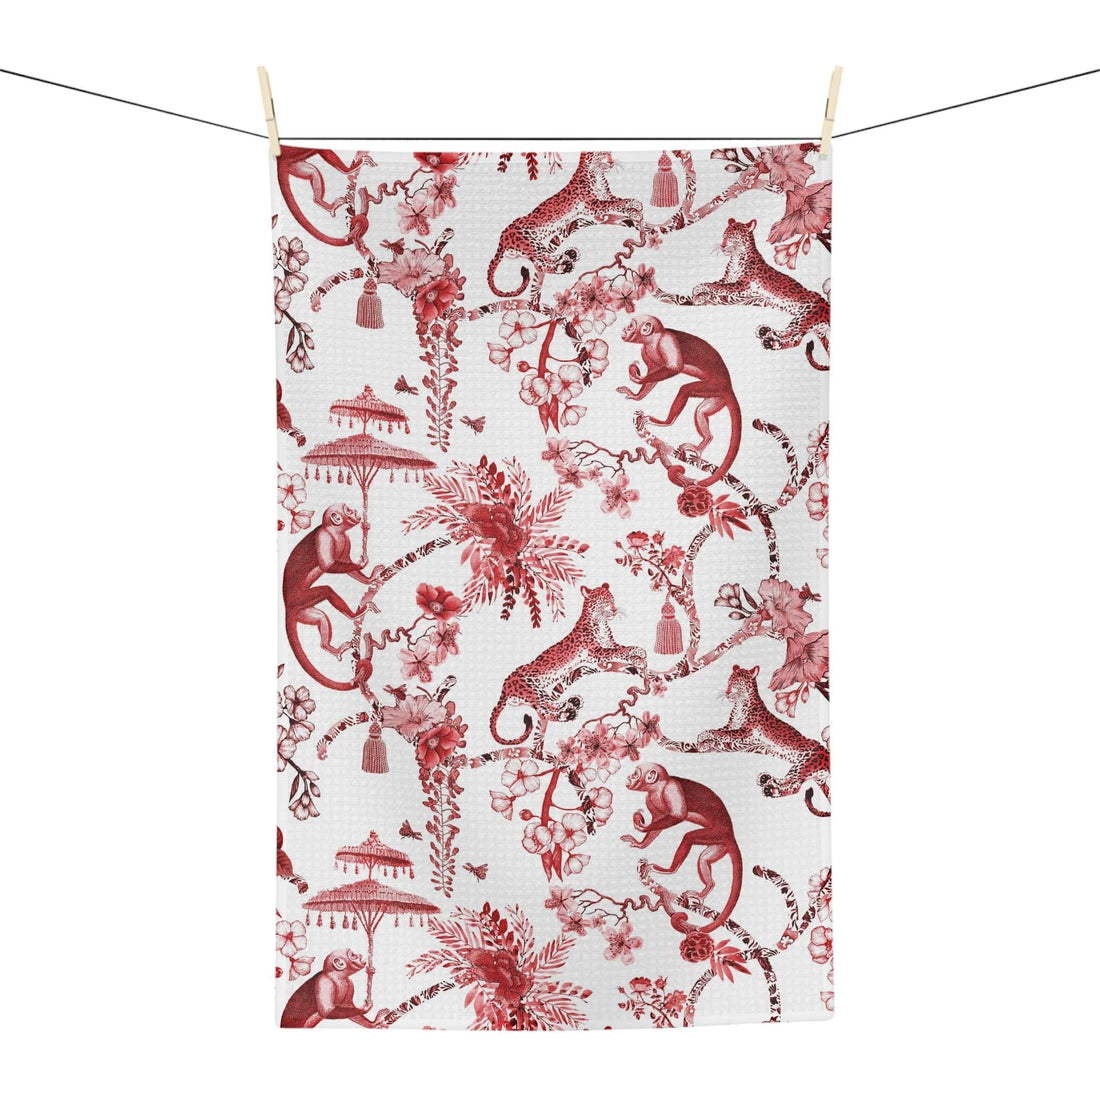 Kate McEnroe New York Chinoiserie Jungle Botanical Toile Tea Towel, Red, White Chinoiserie Floral Kitchen Linens , Country Farmhouse Table Decor - 131582623 27492443116252275610